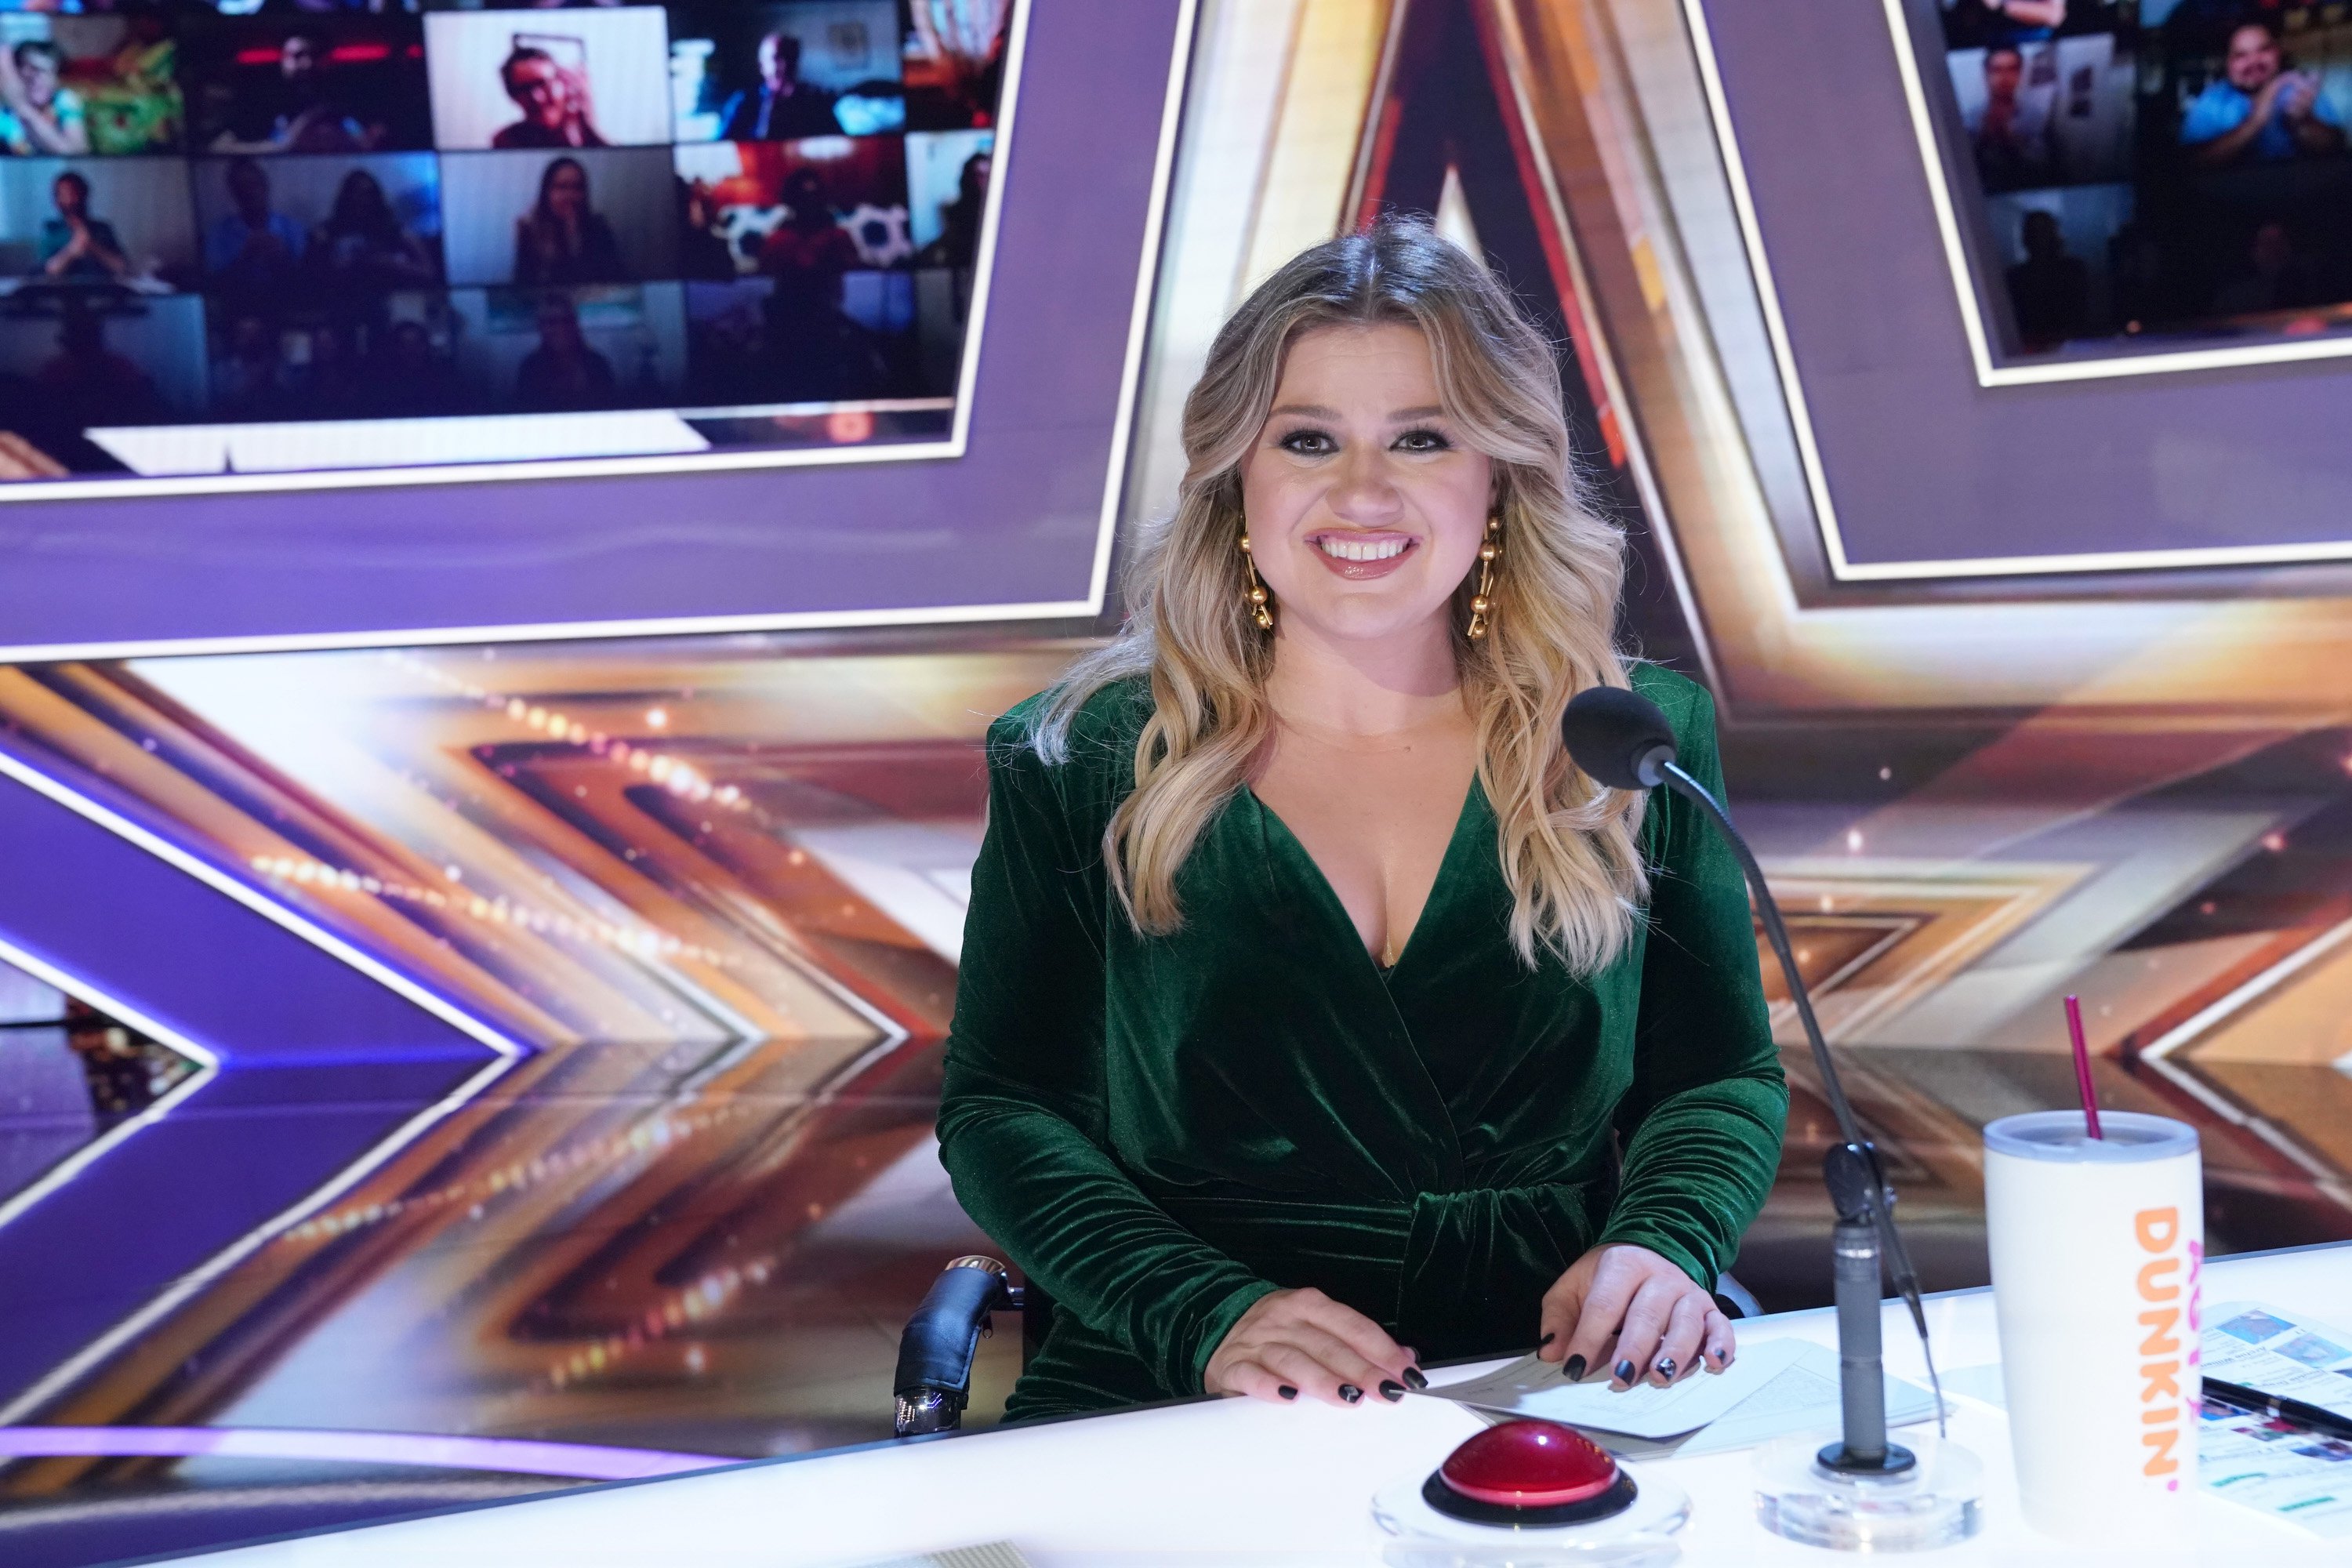 Kelly Clarkson serving as a guest judge on "America's Got Talent" on August 11, 2020. | Source: Getty Images.